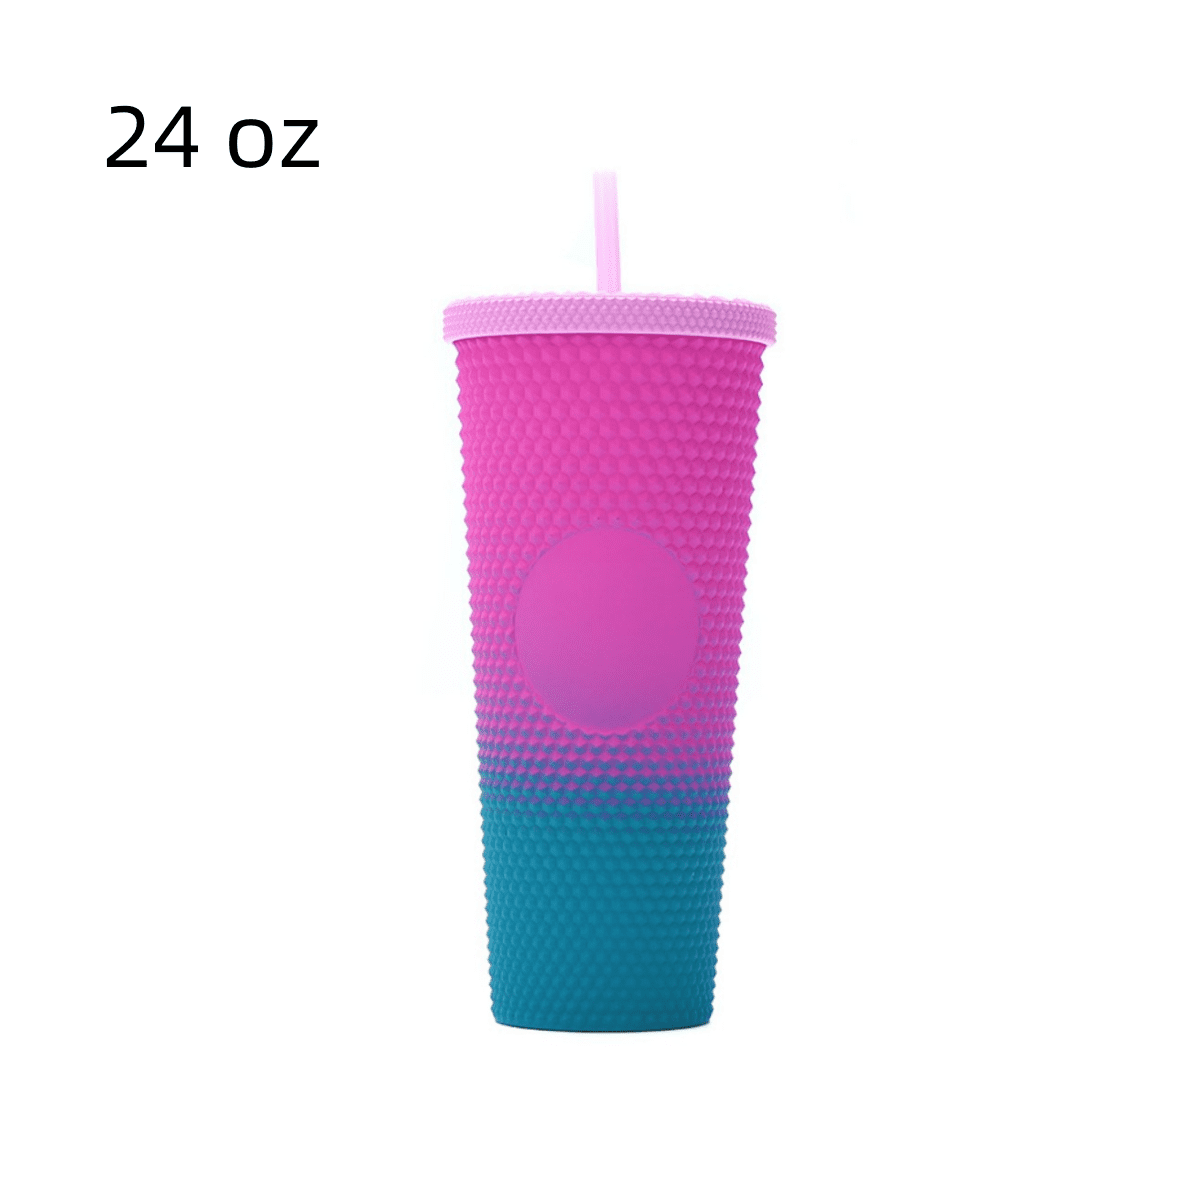 New Arrival 320ml Smoothie Tumbler with Ice Cream Lid Plastic Kawaii Straw  Water Cup Double Wall